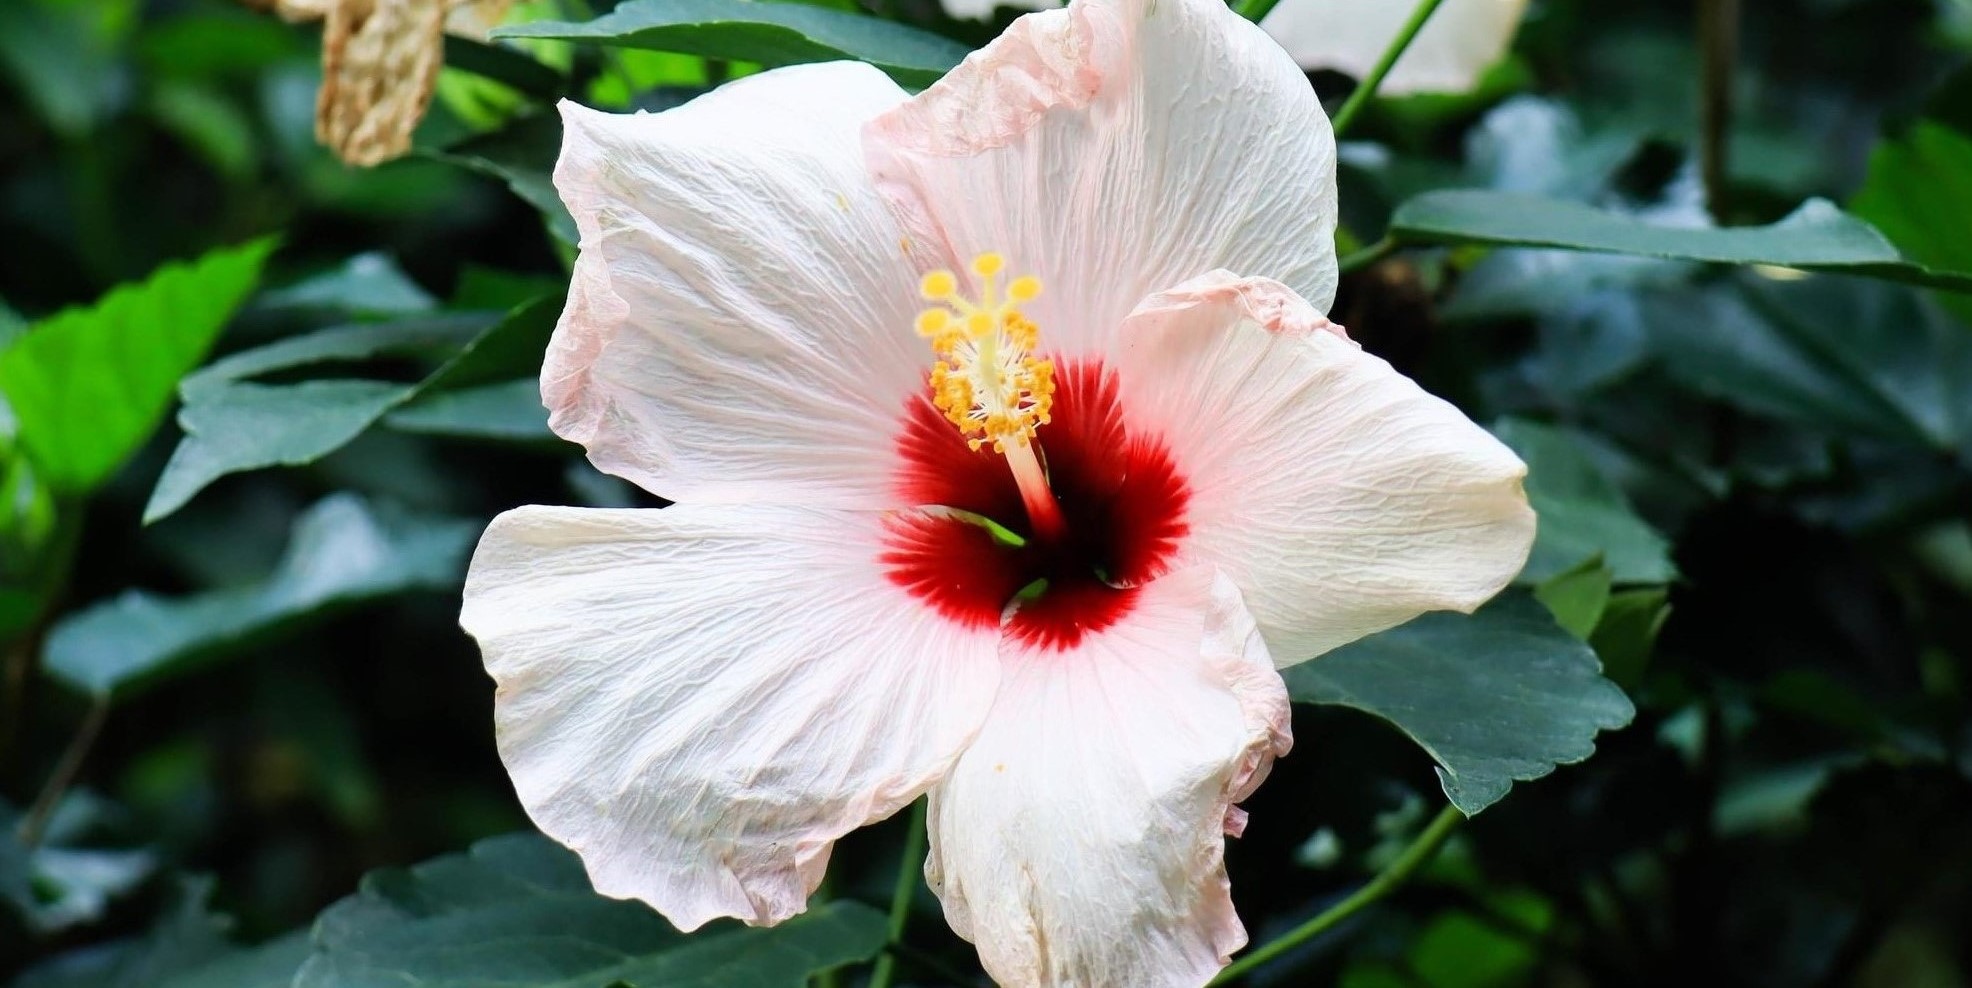 Chinese hibiscus, Description, Flower, Uses, Cultivation, & Facts